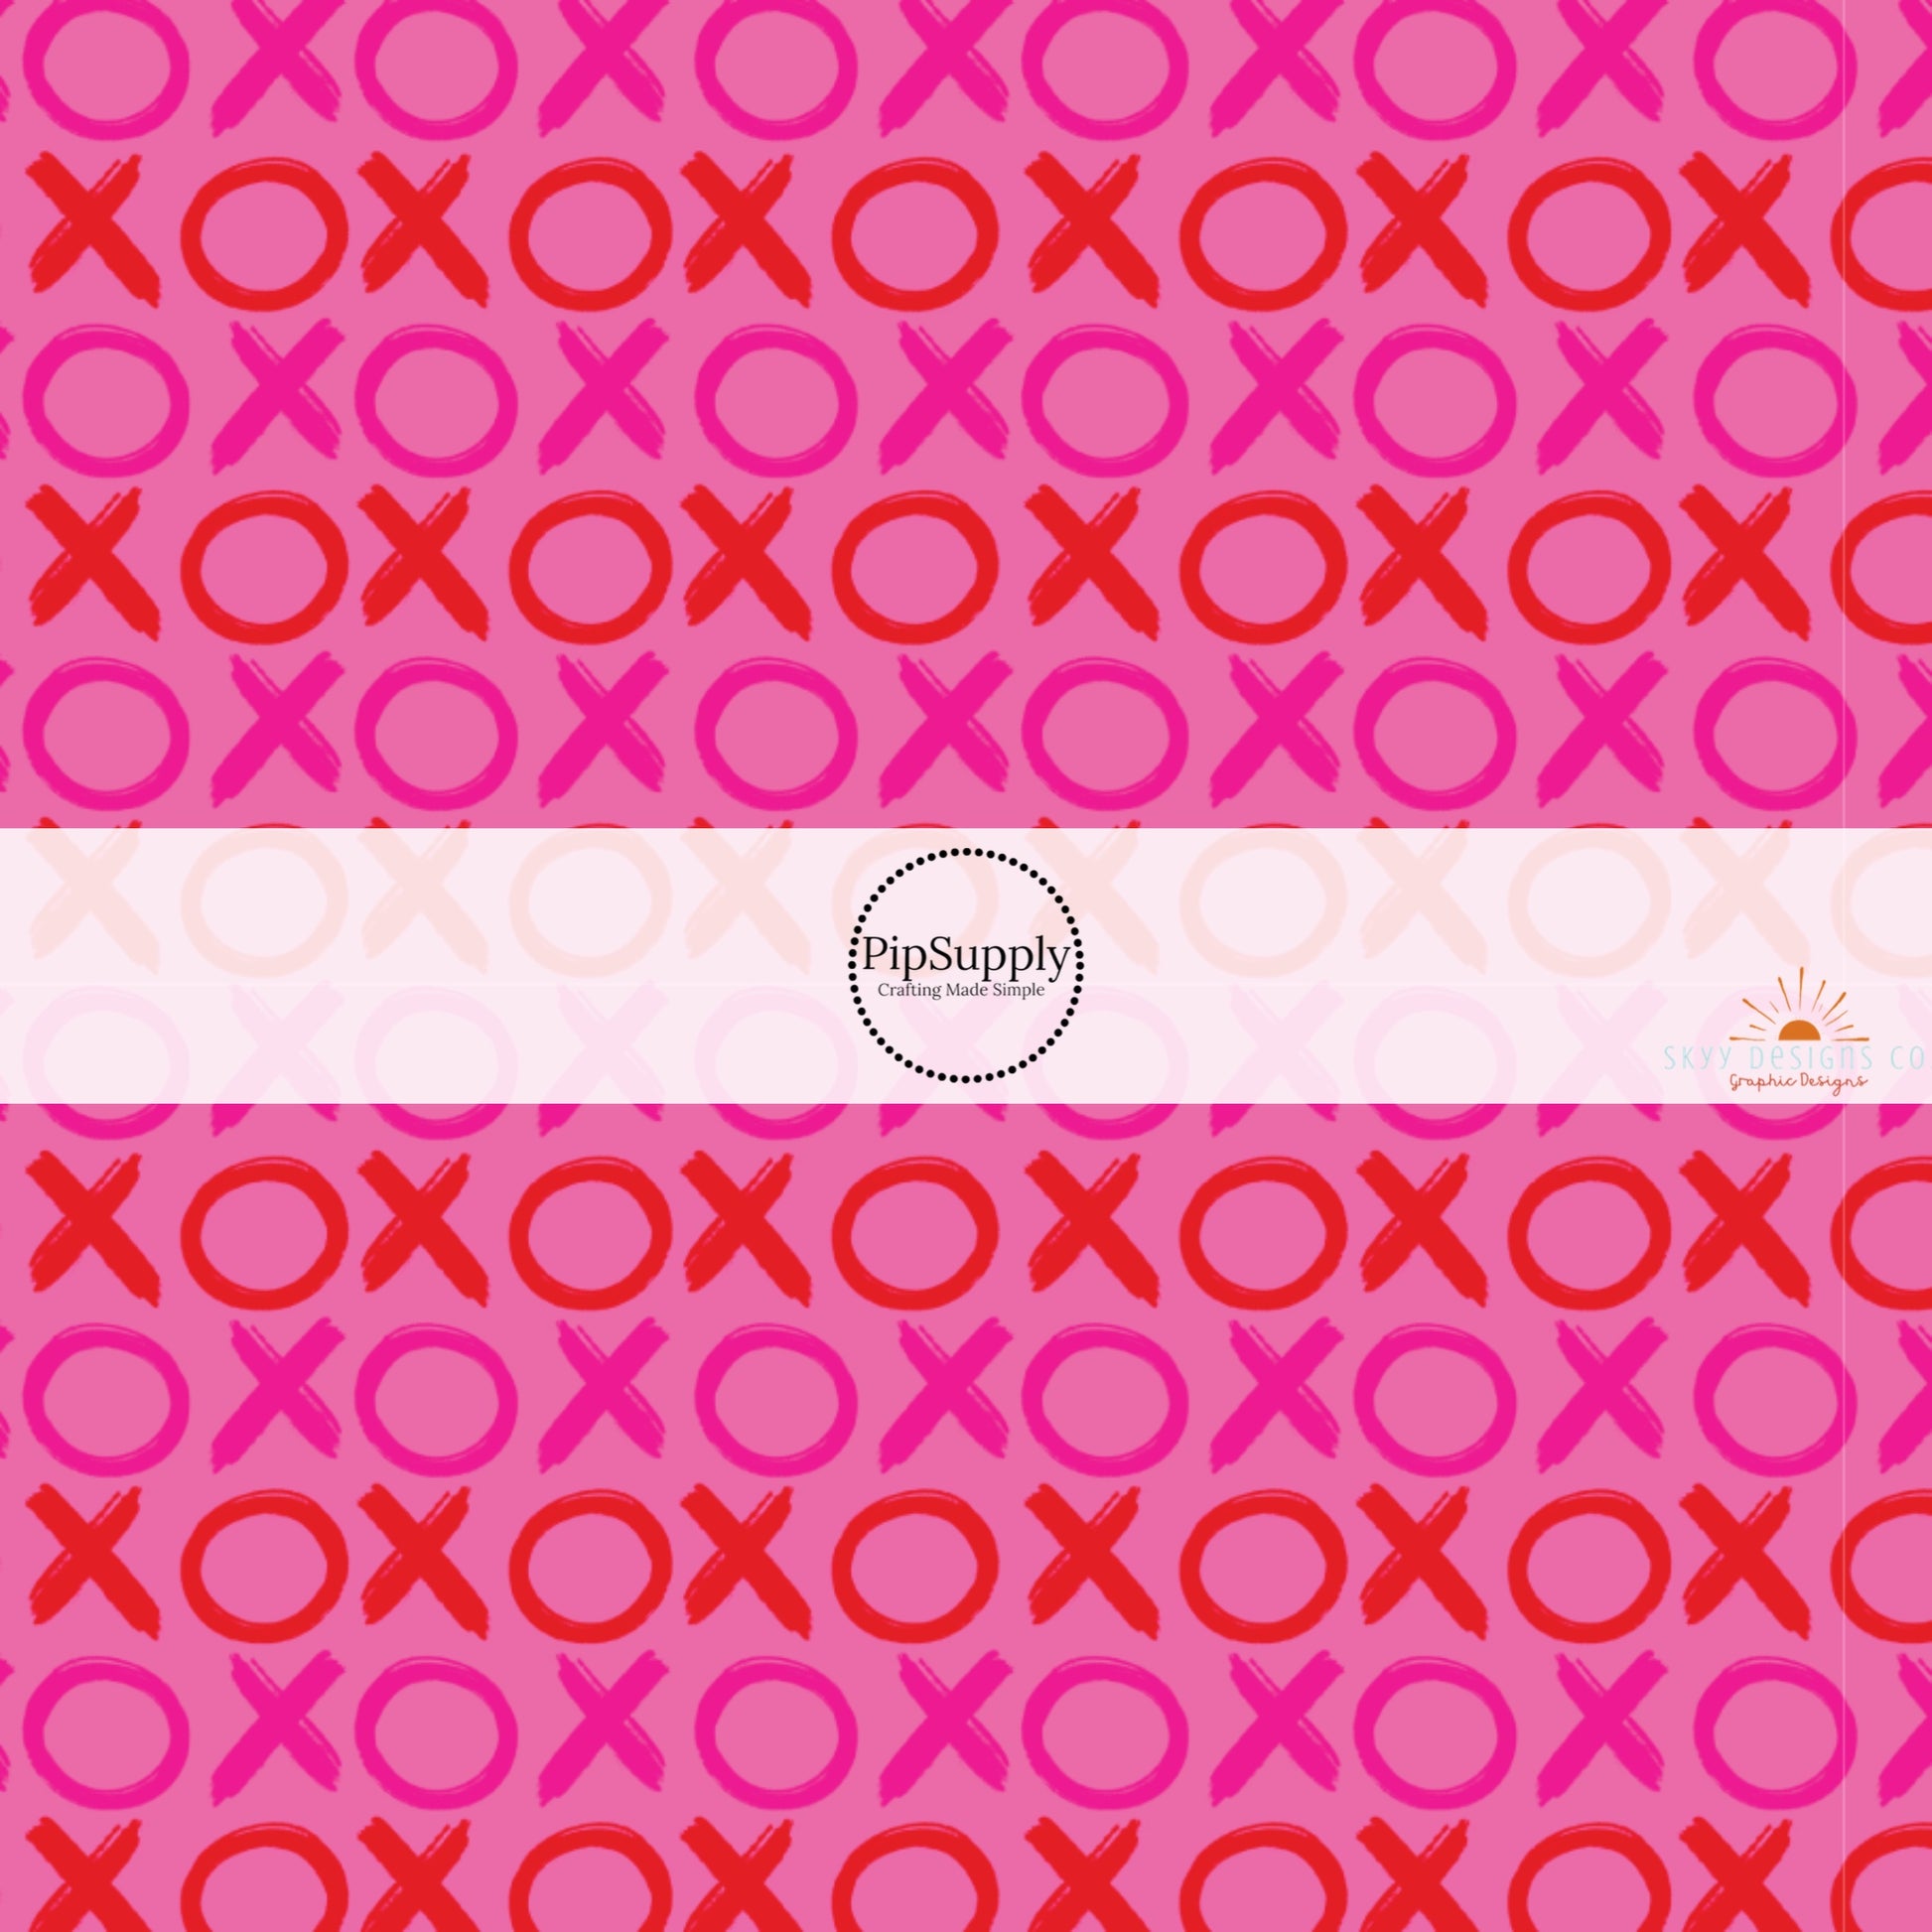 Magenta Pink and Red "XO'S" on Pink Fabric by the Yard.